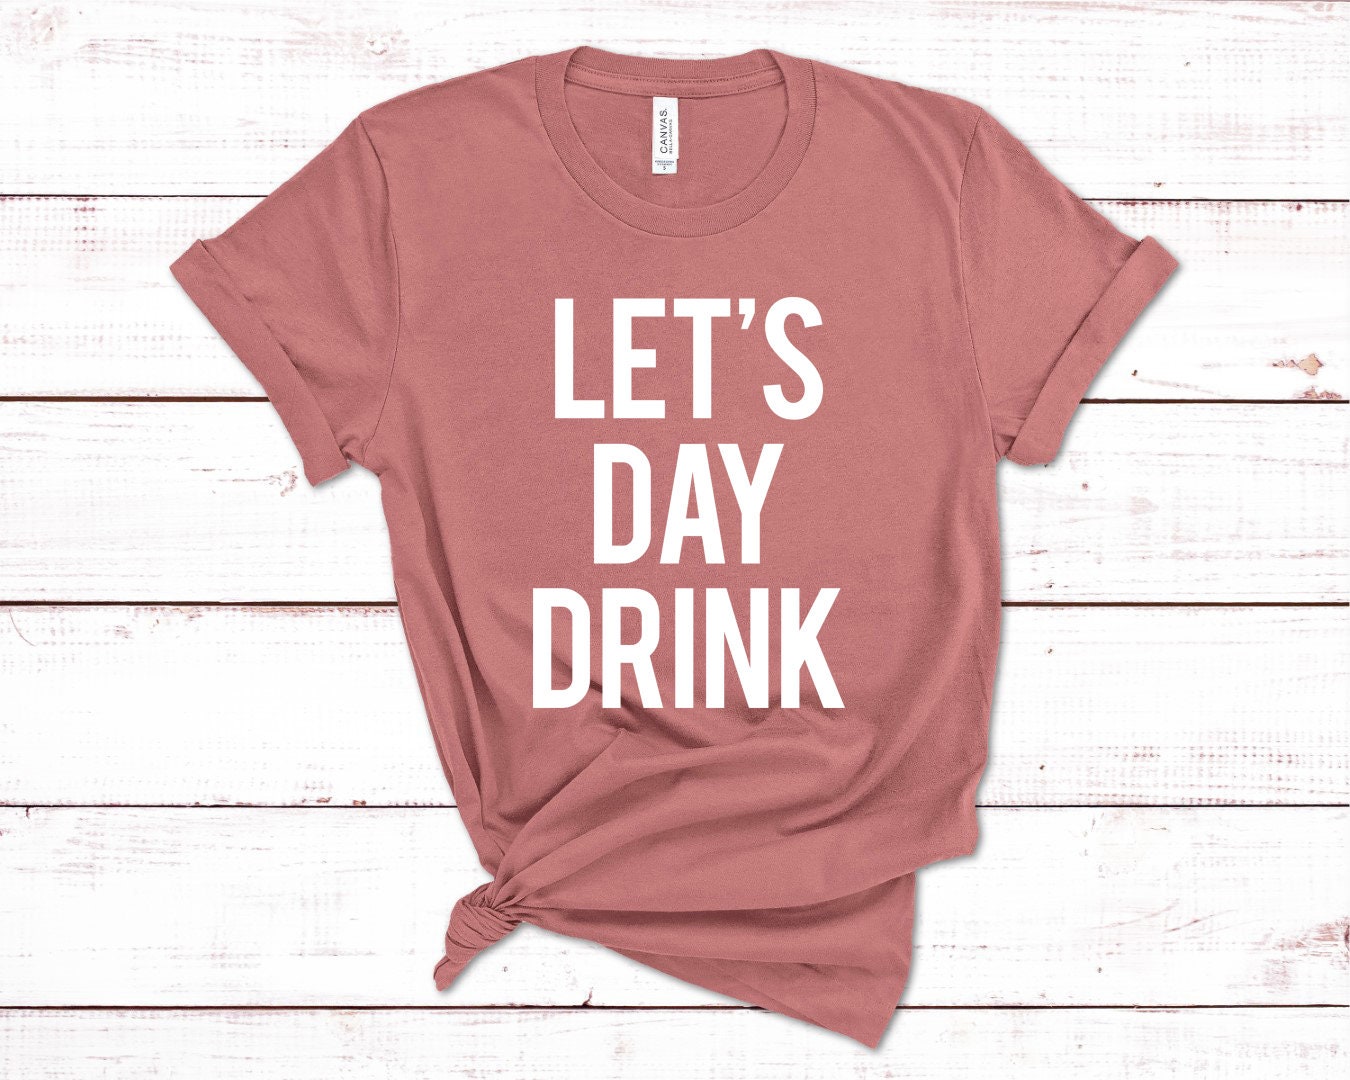 Let's day drink t shirt funny graphic tees slogan shirt | Etsy